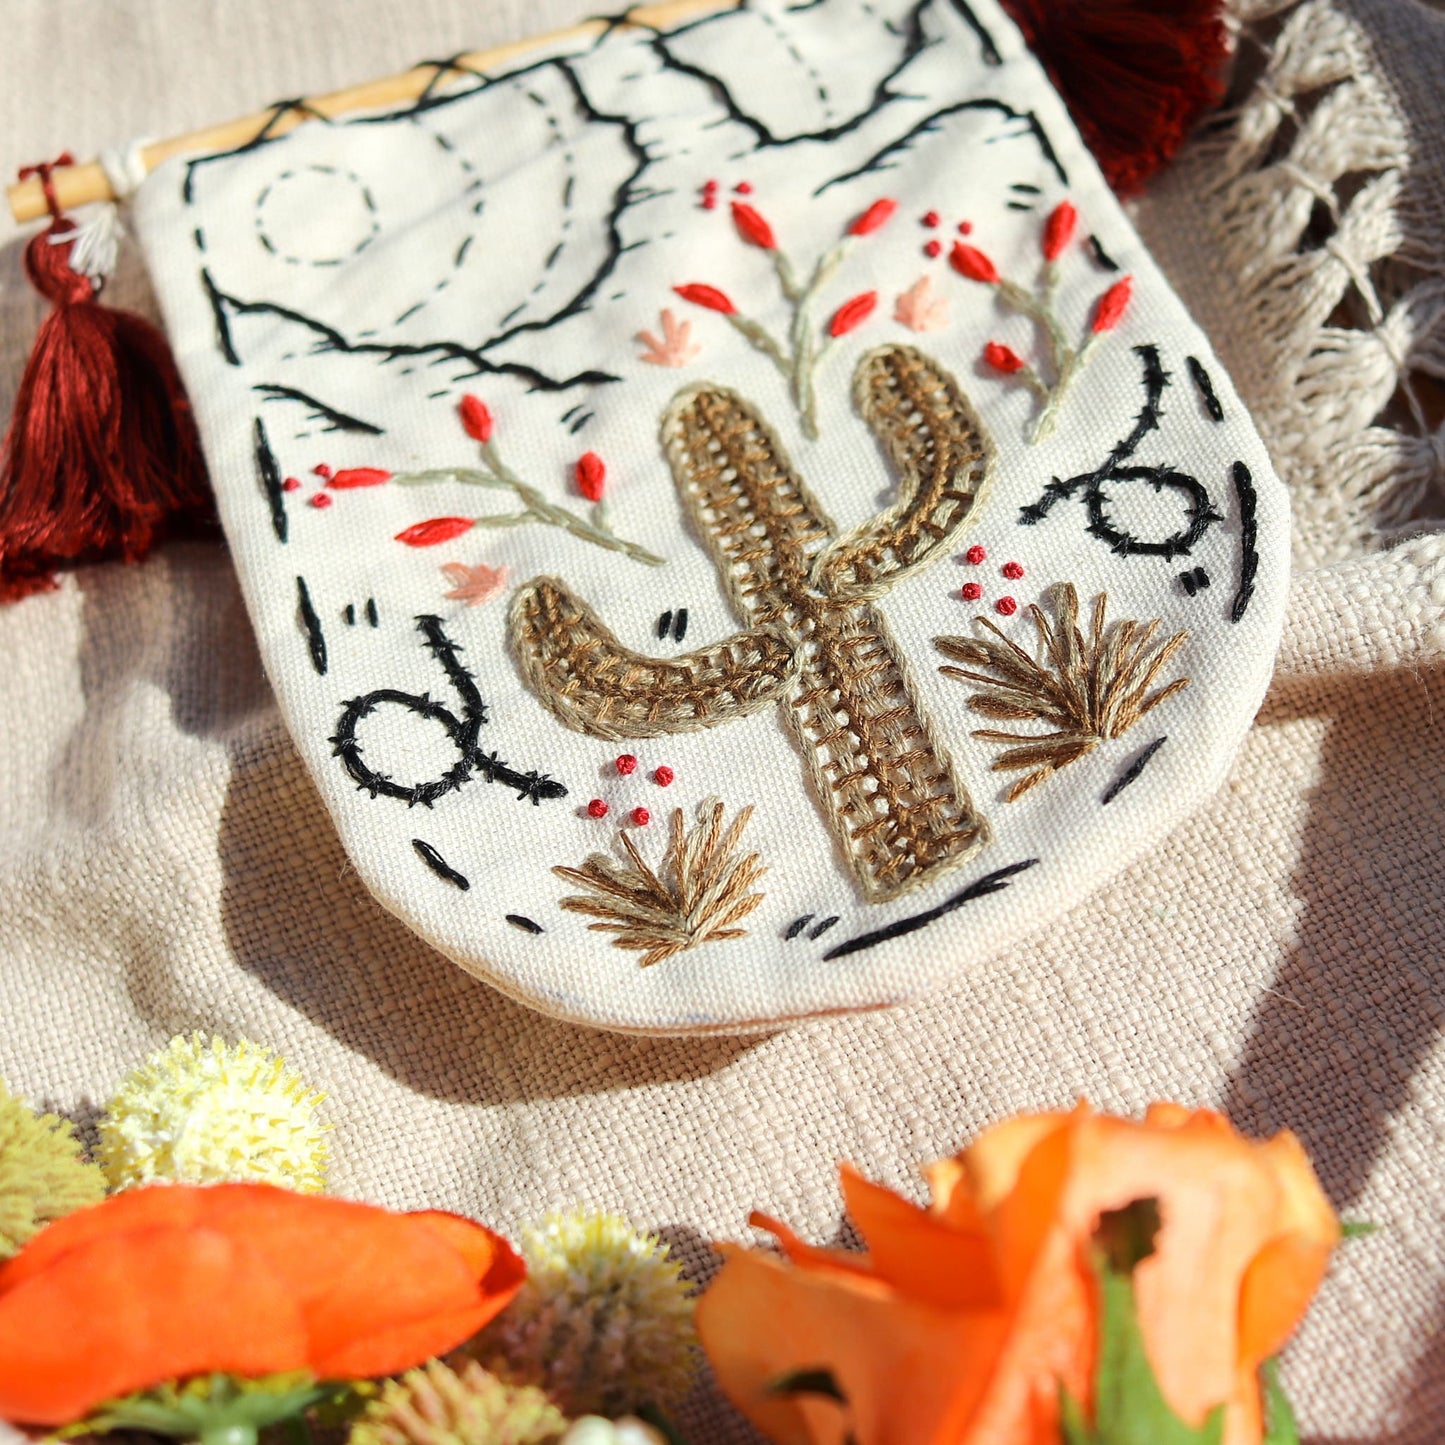 The Desert Scape | Hand Embroidery Kit